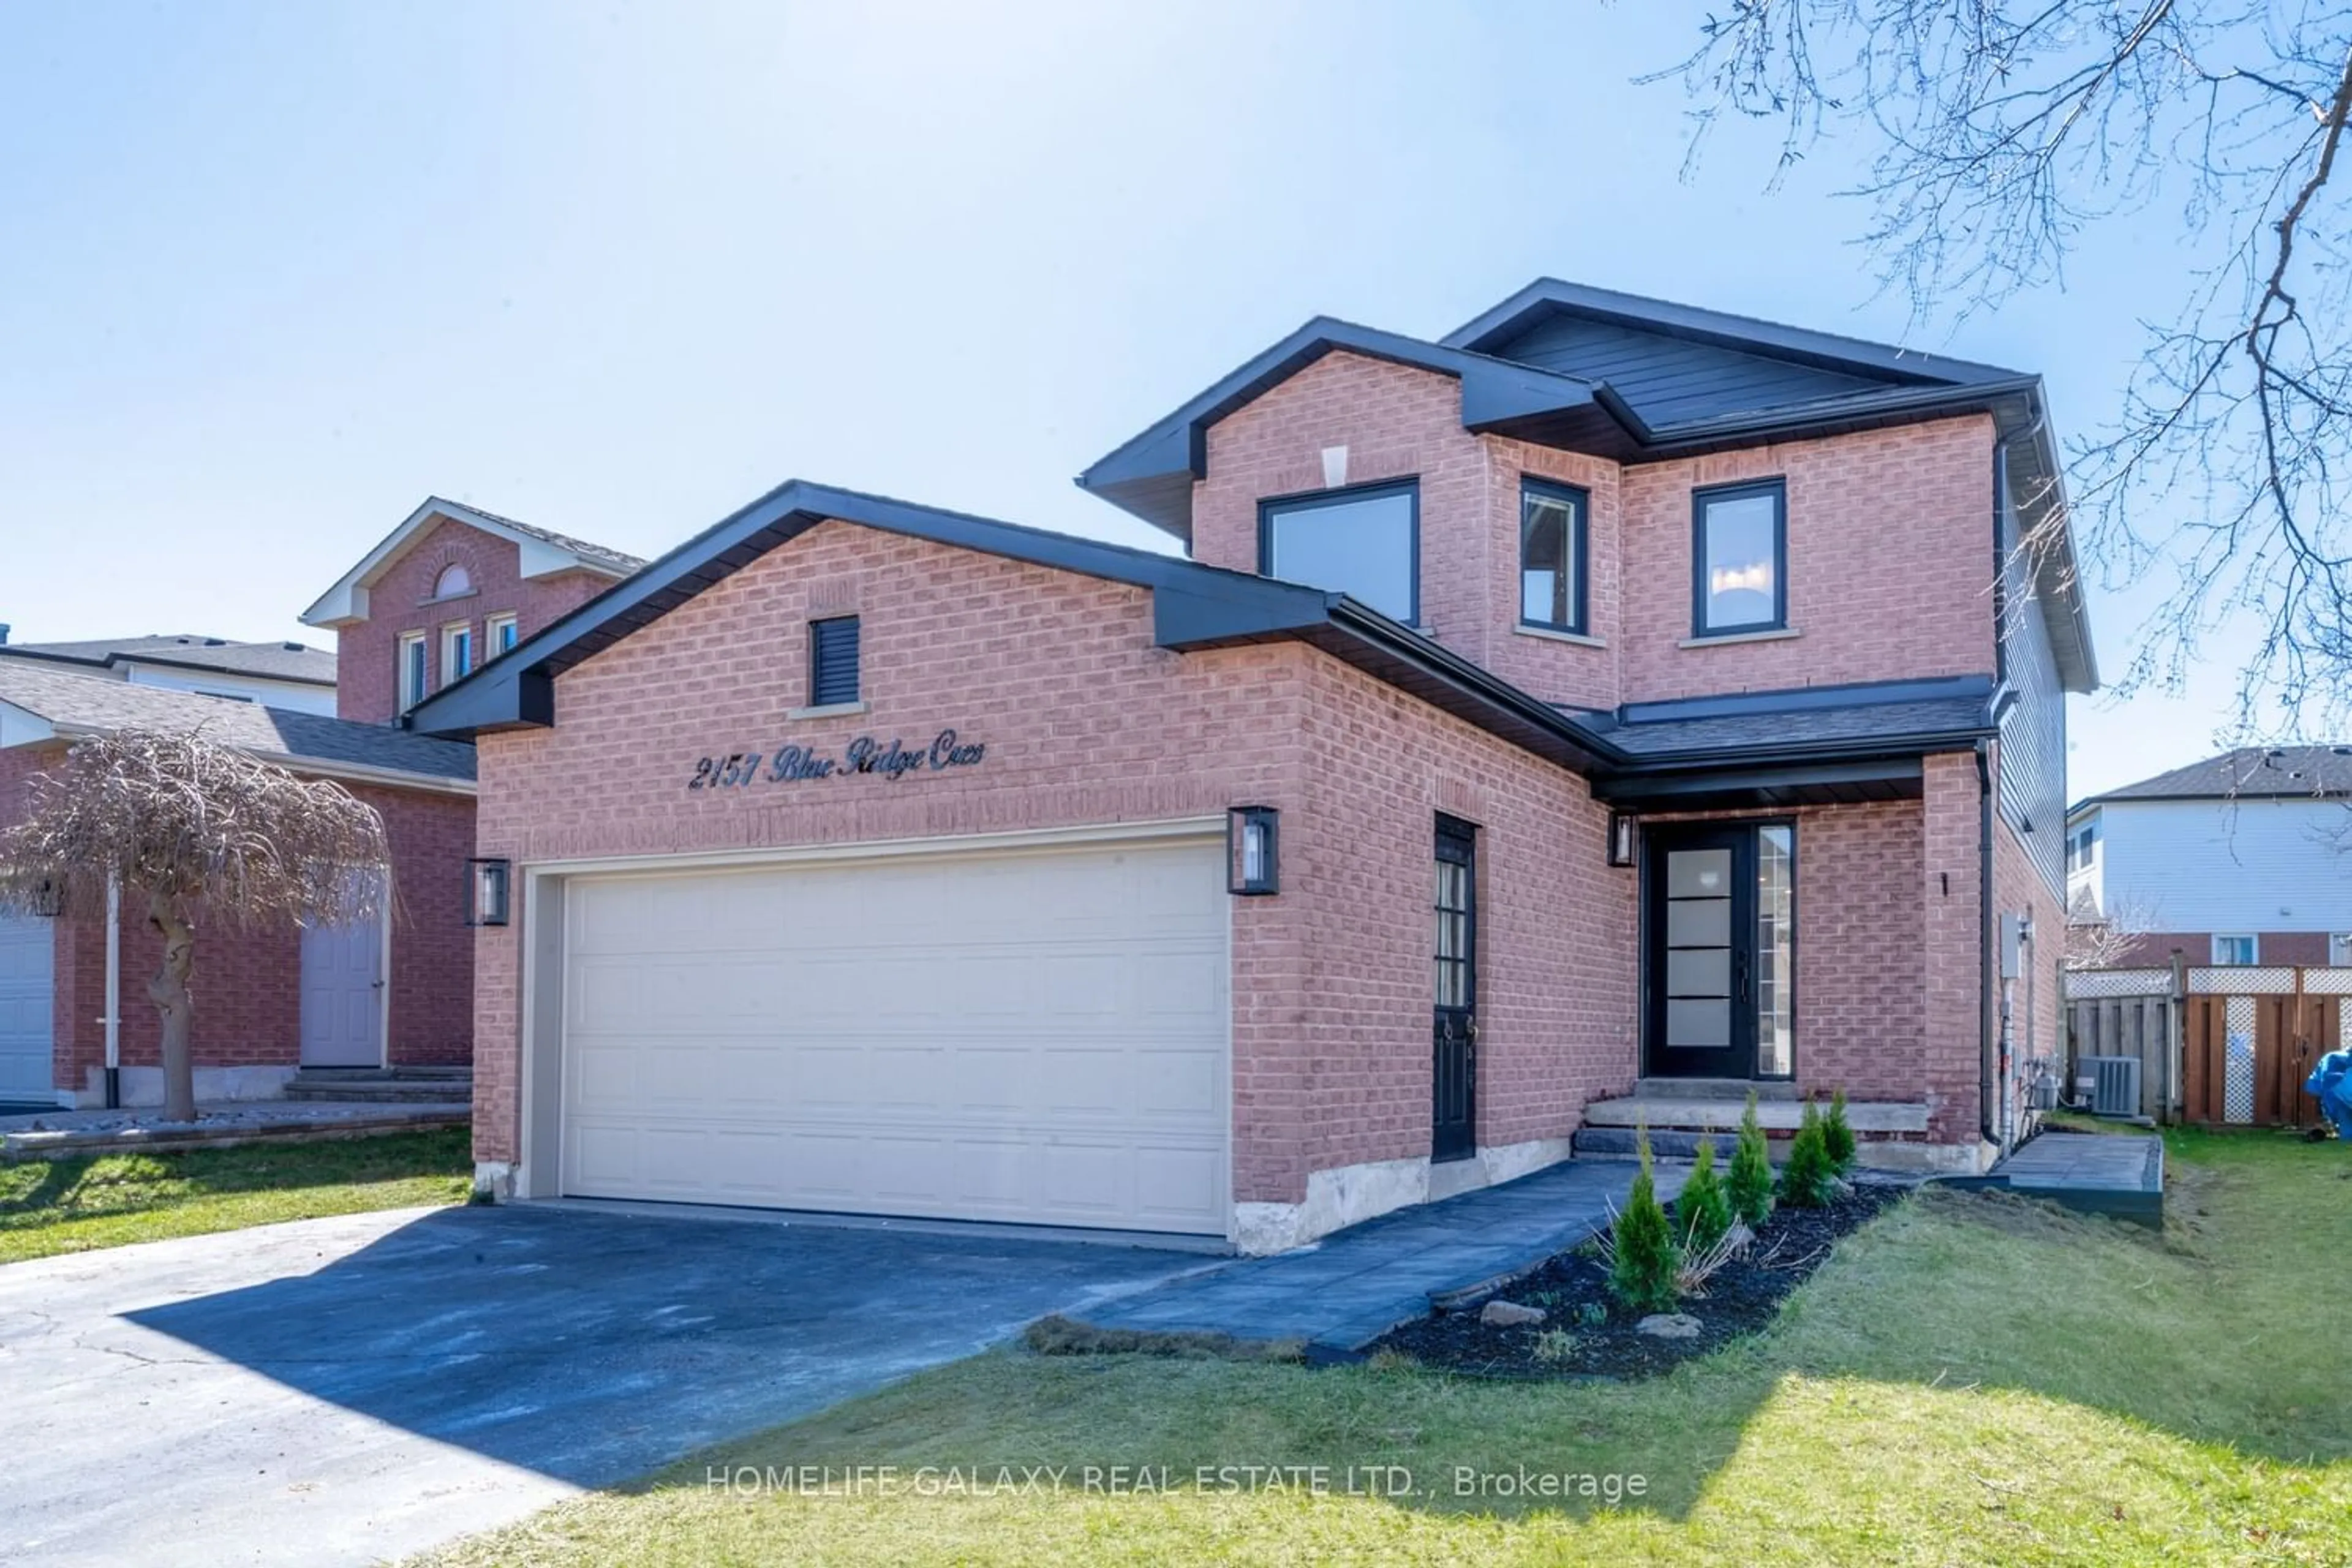 Home with brick exterior material for 2157 Blue Ridge Cres, Pickering Ontario L1X 2M7